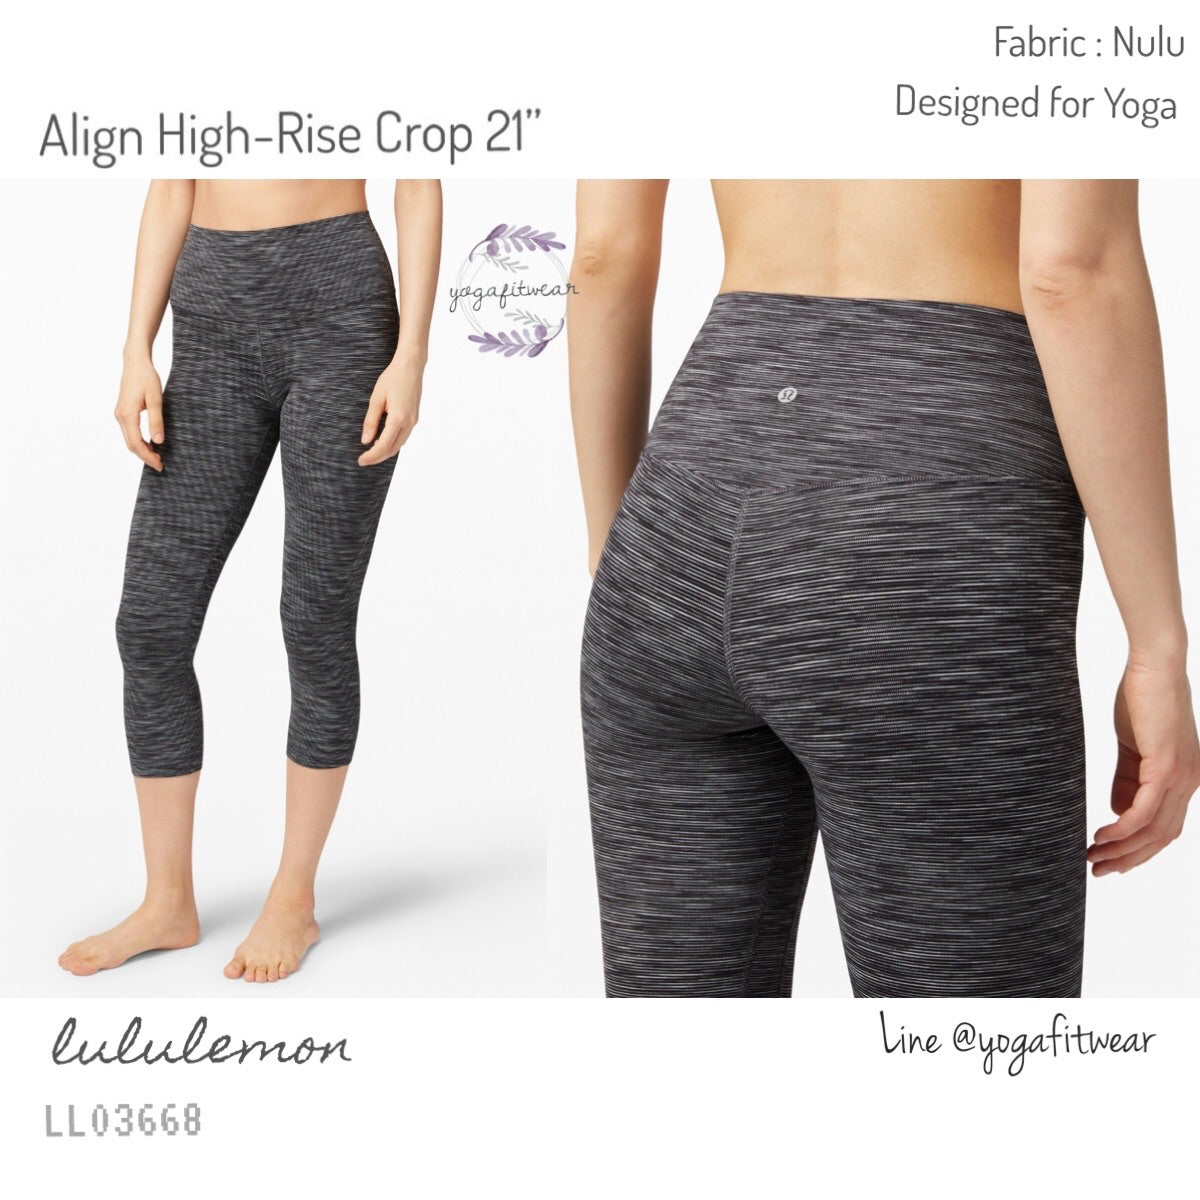 Lululemon : Align High-Rise Crop 21” (wee are from space dark